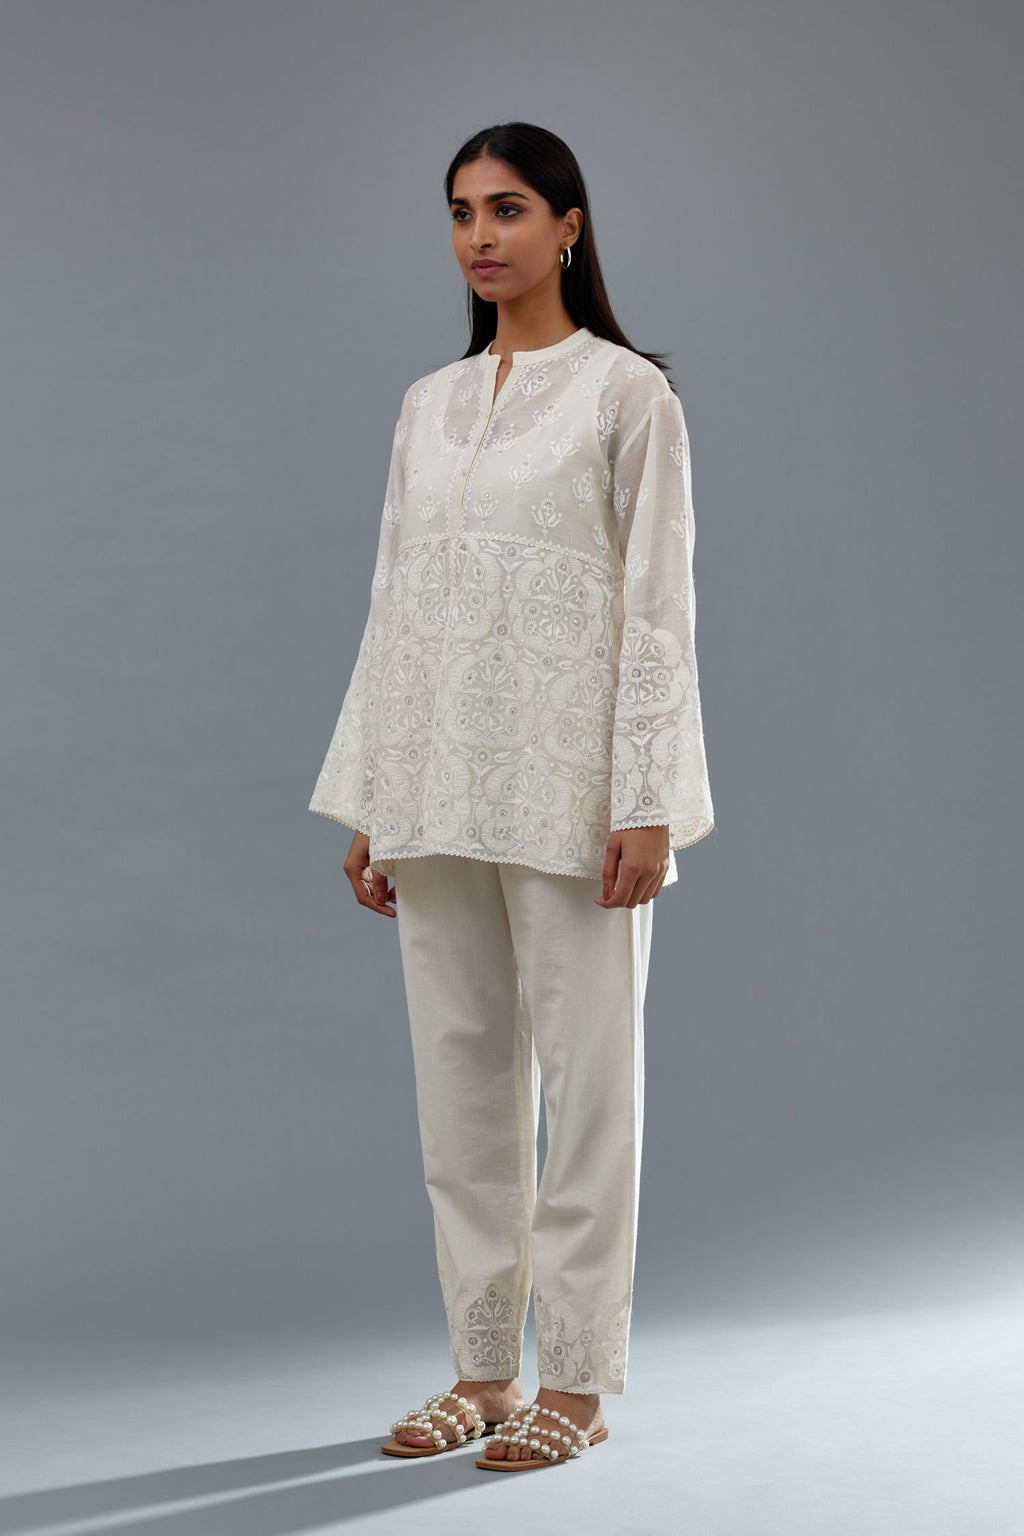 Off white cotton chanderi short top with heavy appliqué, highlighted with sequins, paired with off white cotton straight pants with appliqué and hand attached sequins detailing at bottom hem.